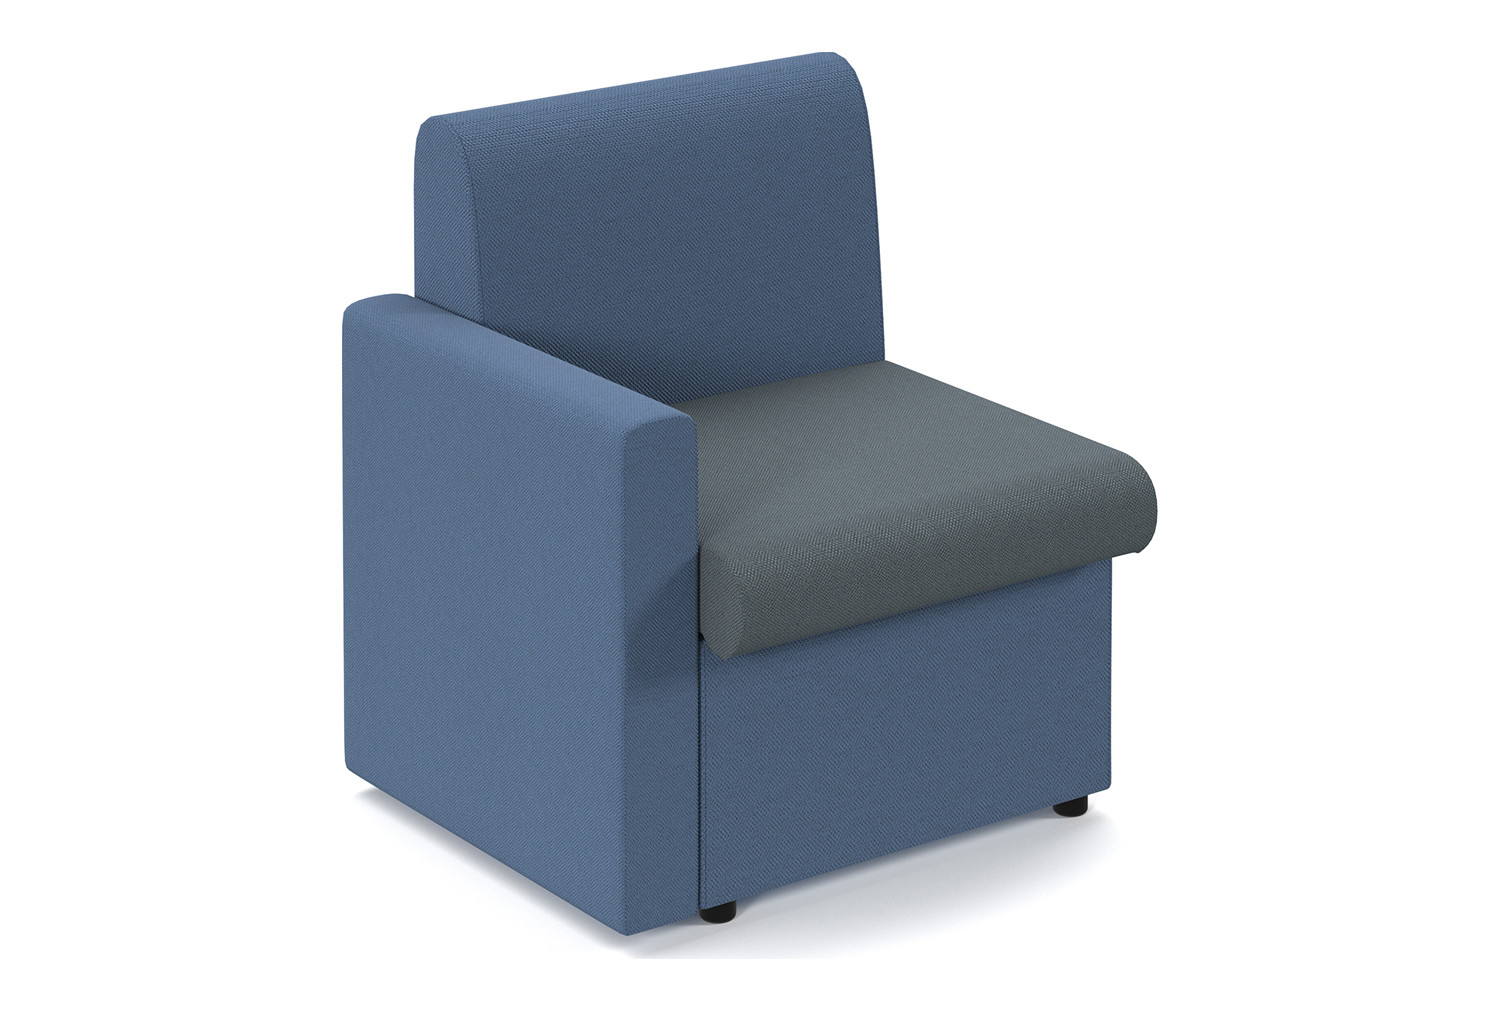 Portland 2 Tone Modular Soft Seating, Chair With Right Arm, Elapse Grey Seat/Range Blue Back, Fully Installed